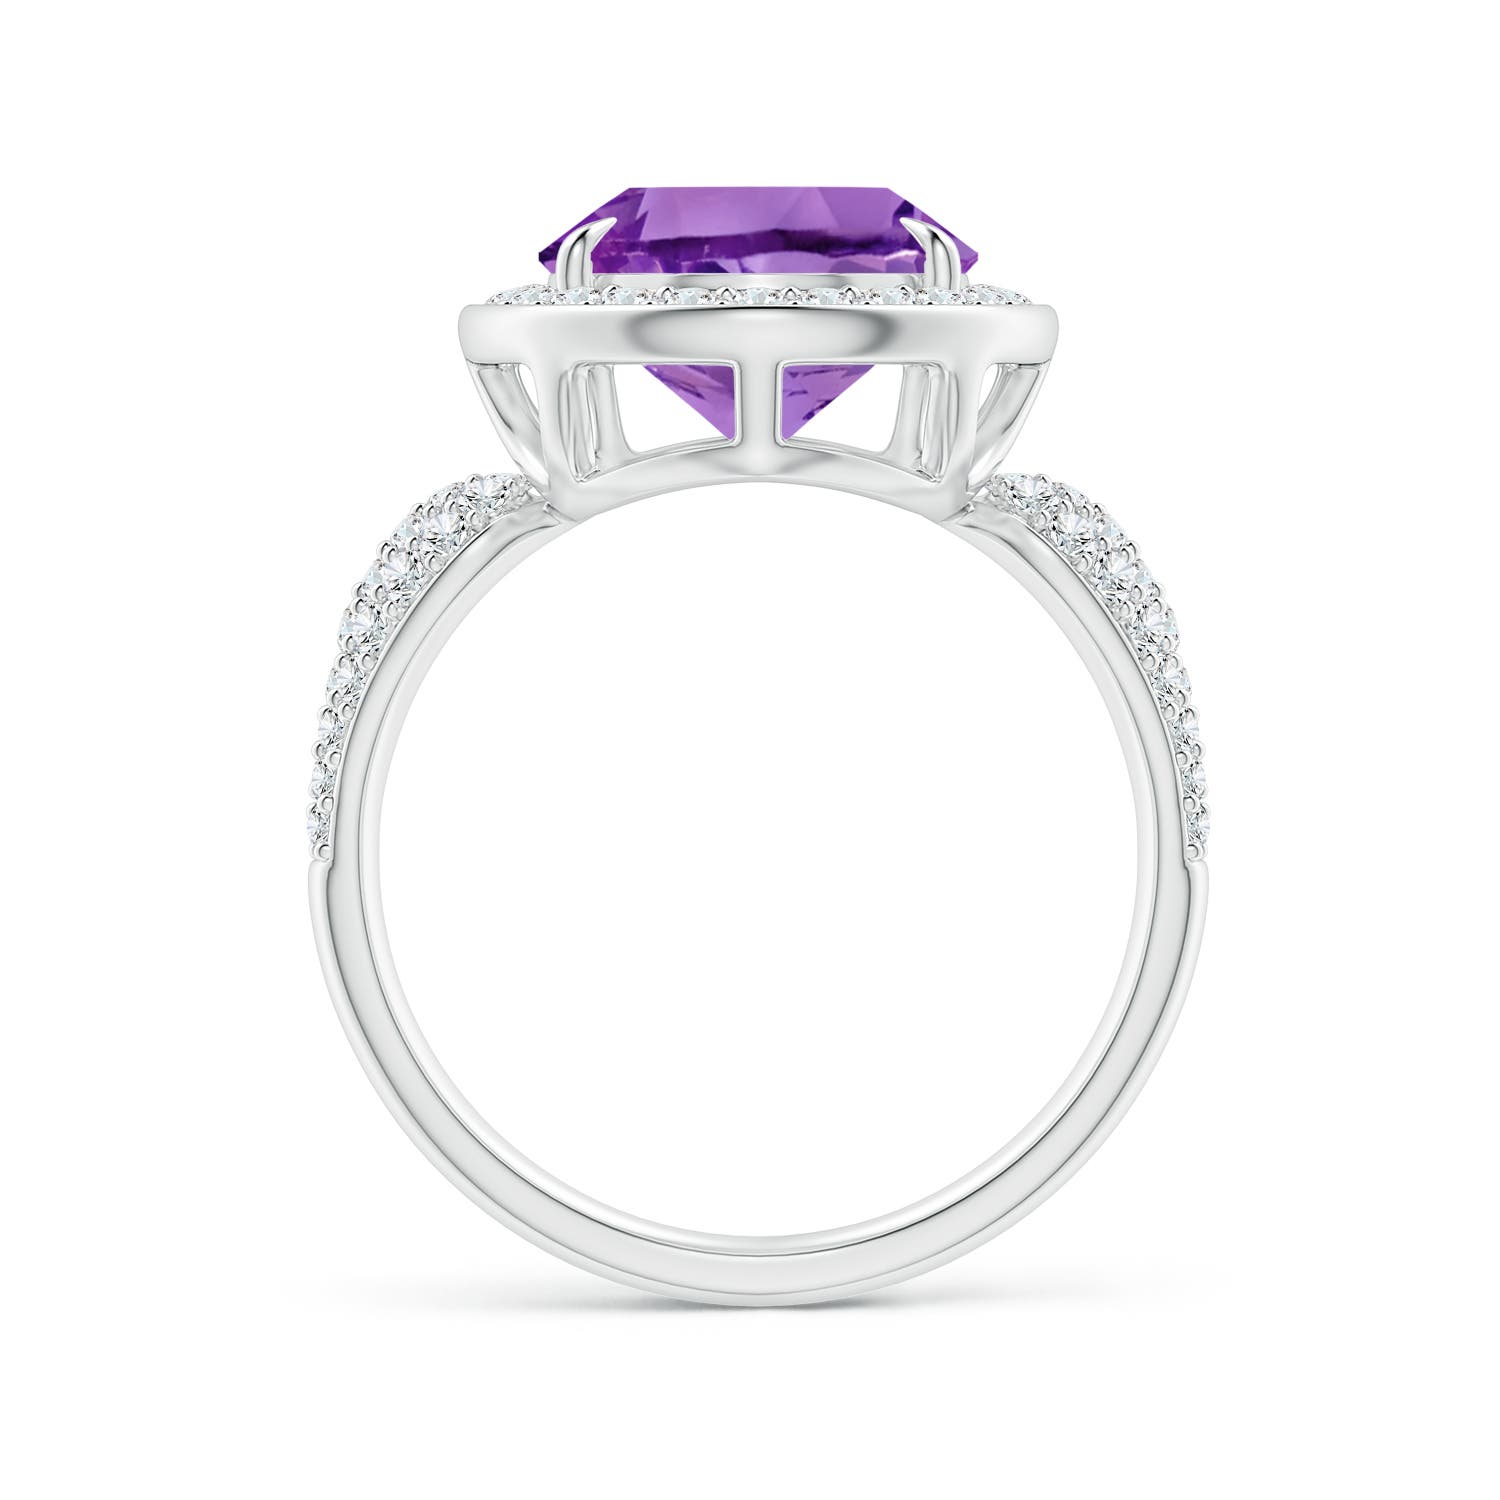 AA - Amethyst / 5.48 CT / 14 KT White Gold